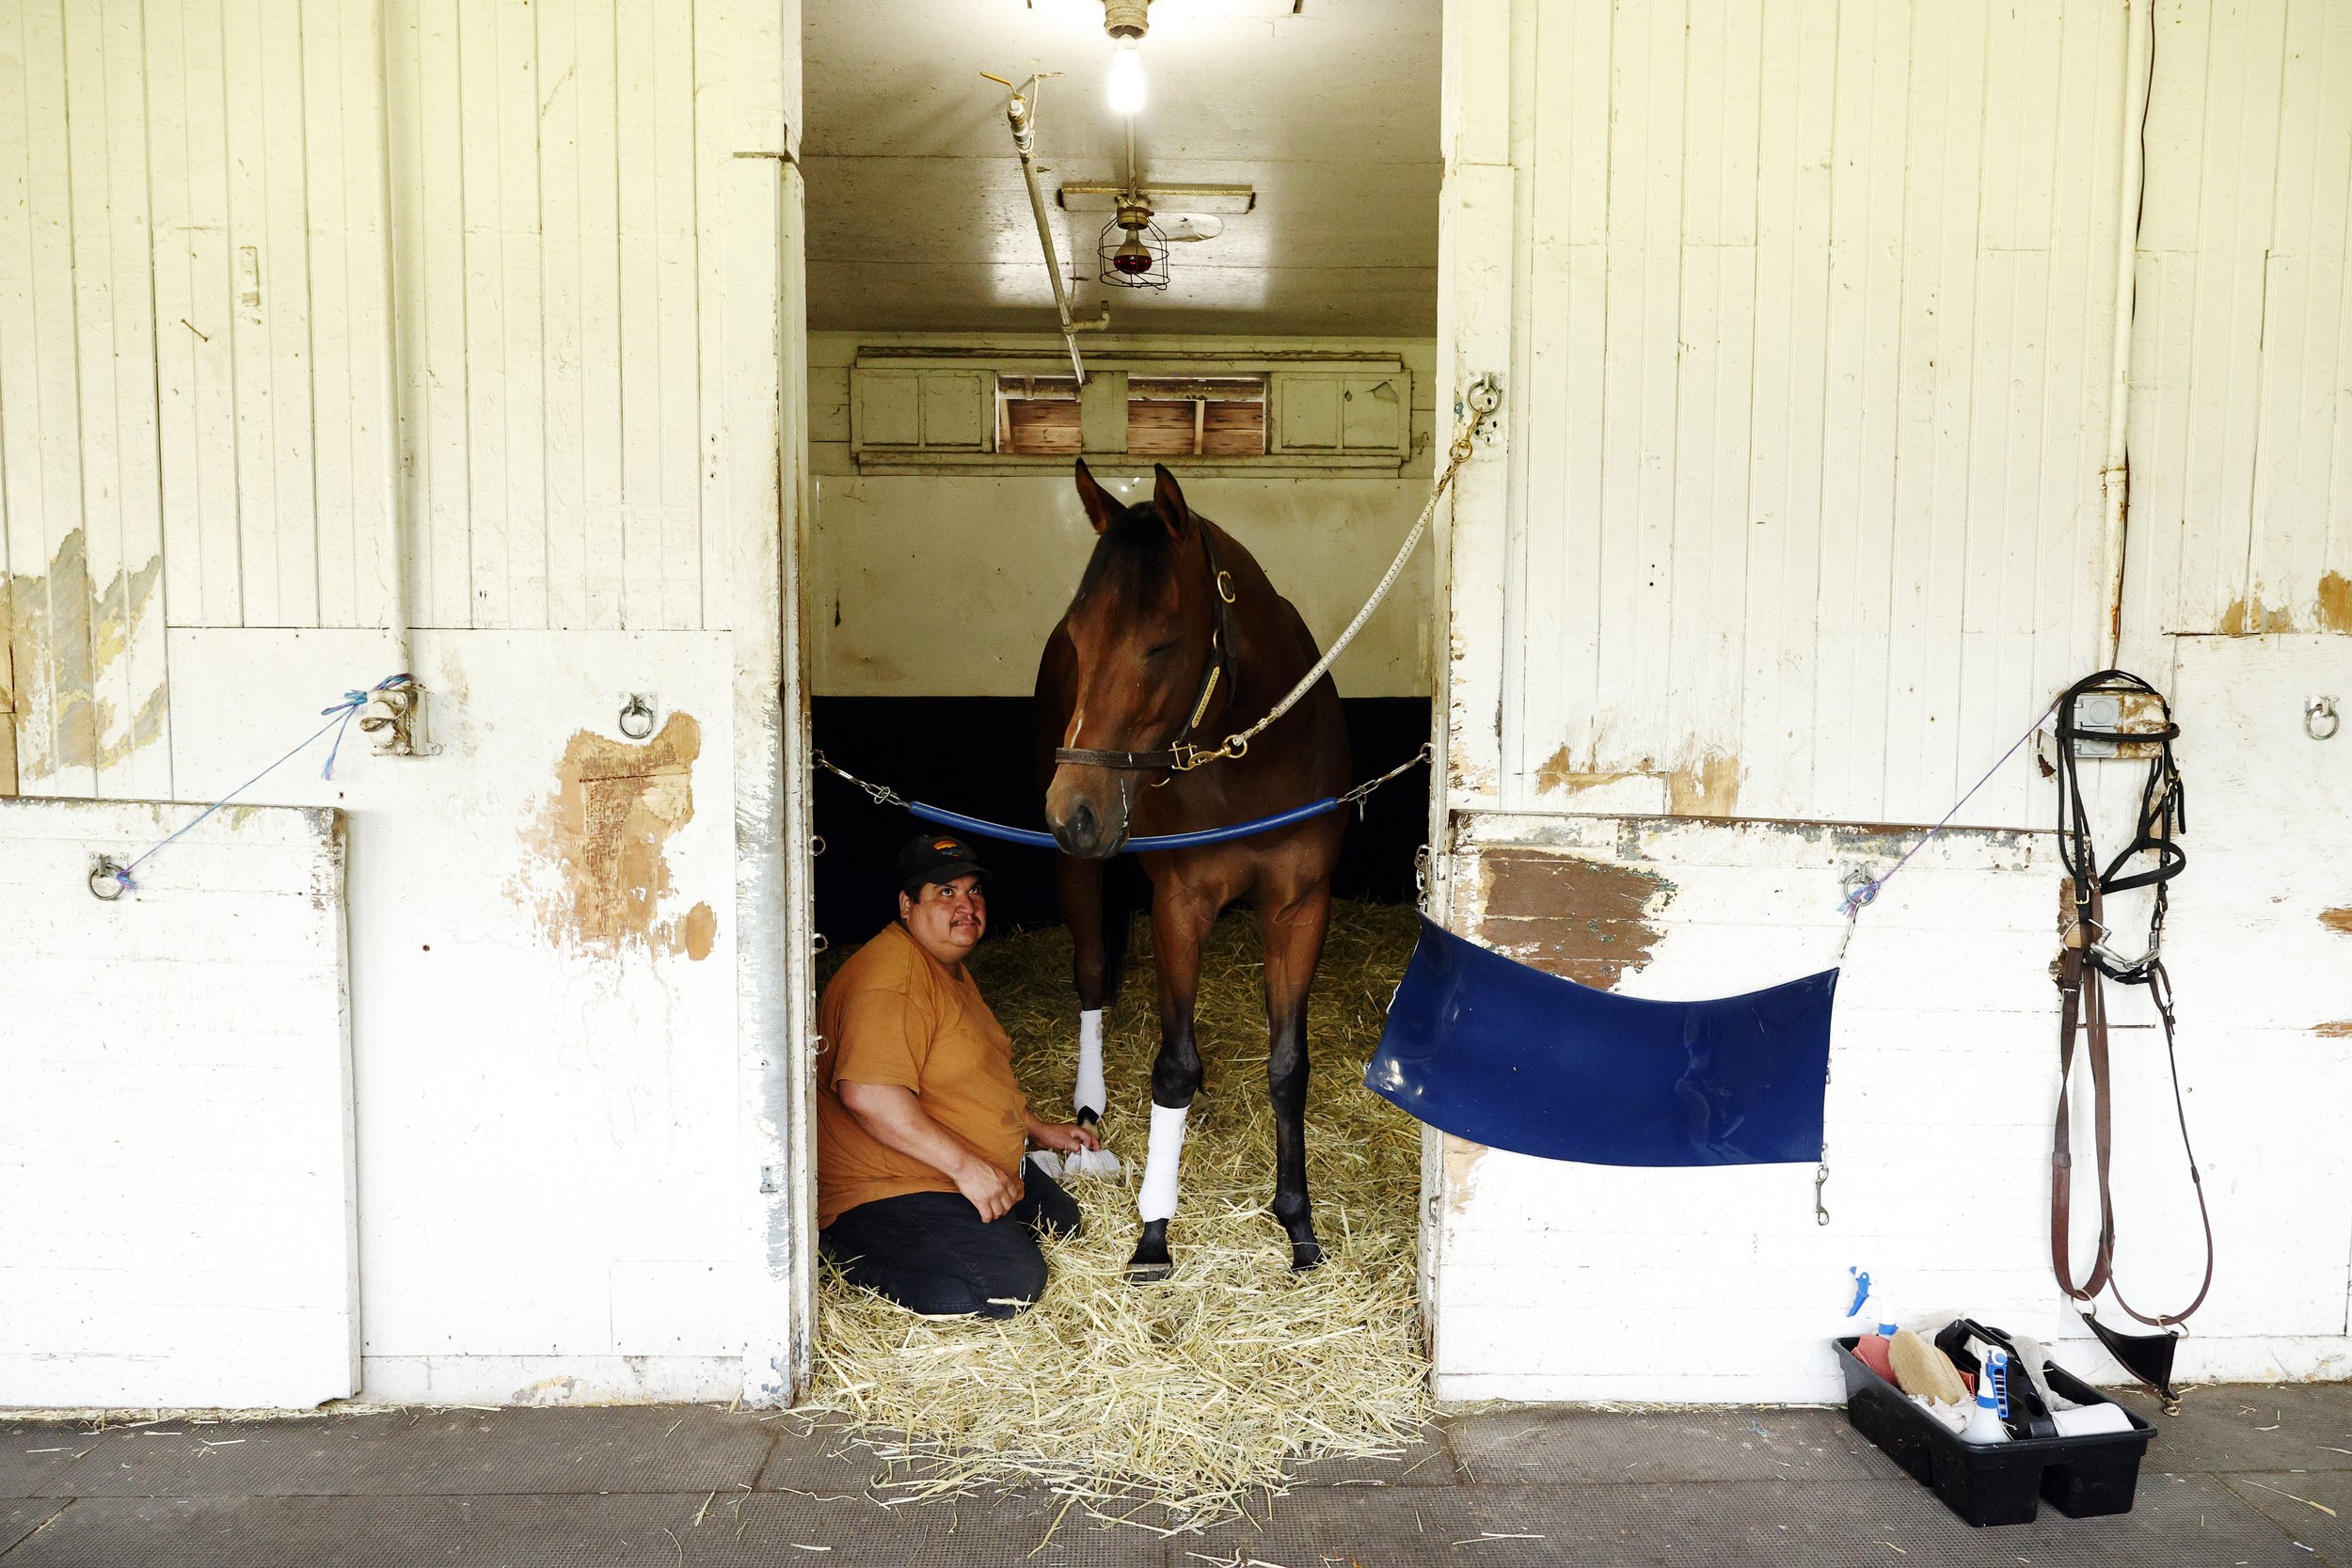  A stable hand wraps a horse's legs in a barn during a morning workout prior to the 154th running of the Belmont Stakes at Belmont Park on June 07, 2022 in Elmont, New York. 